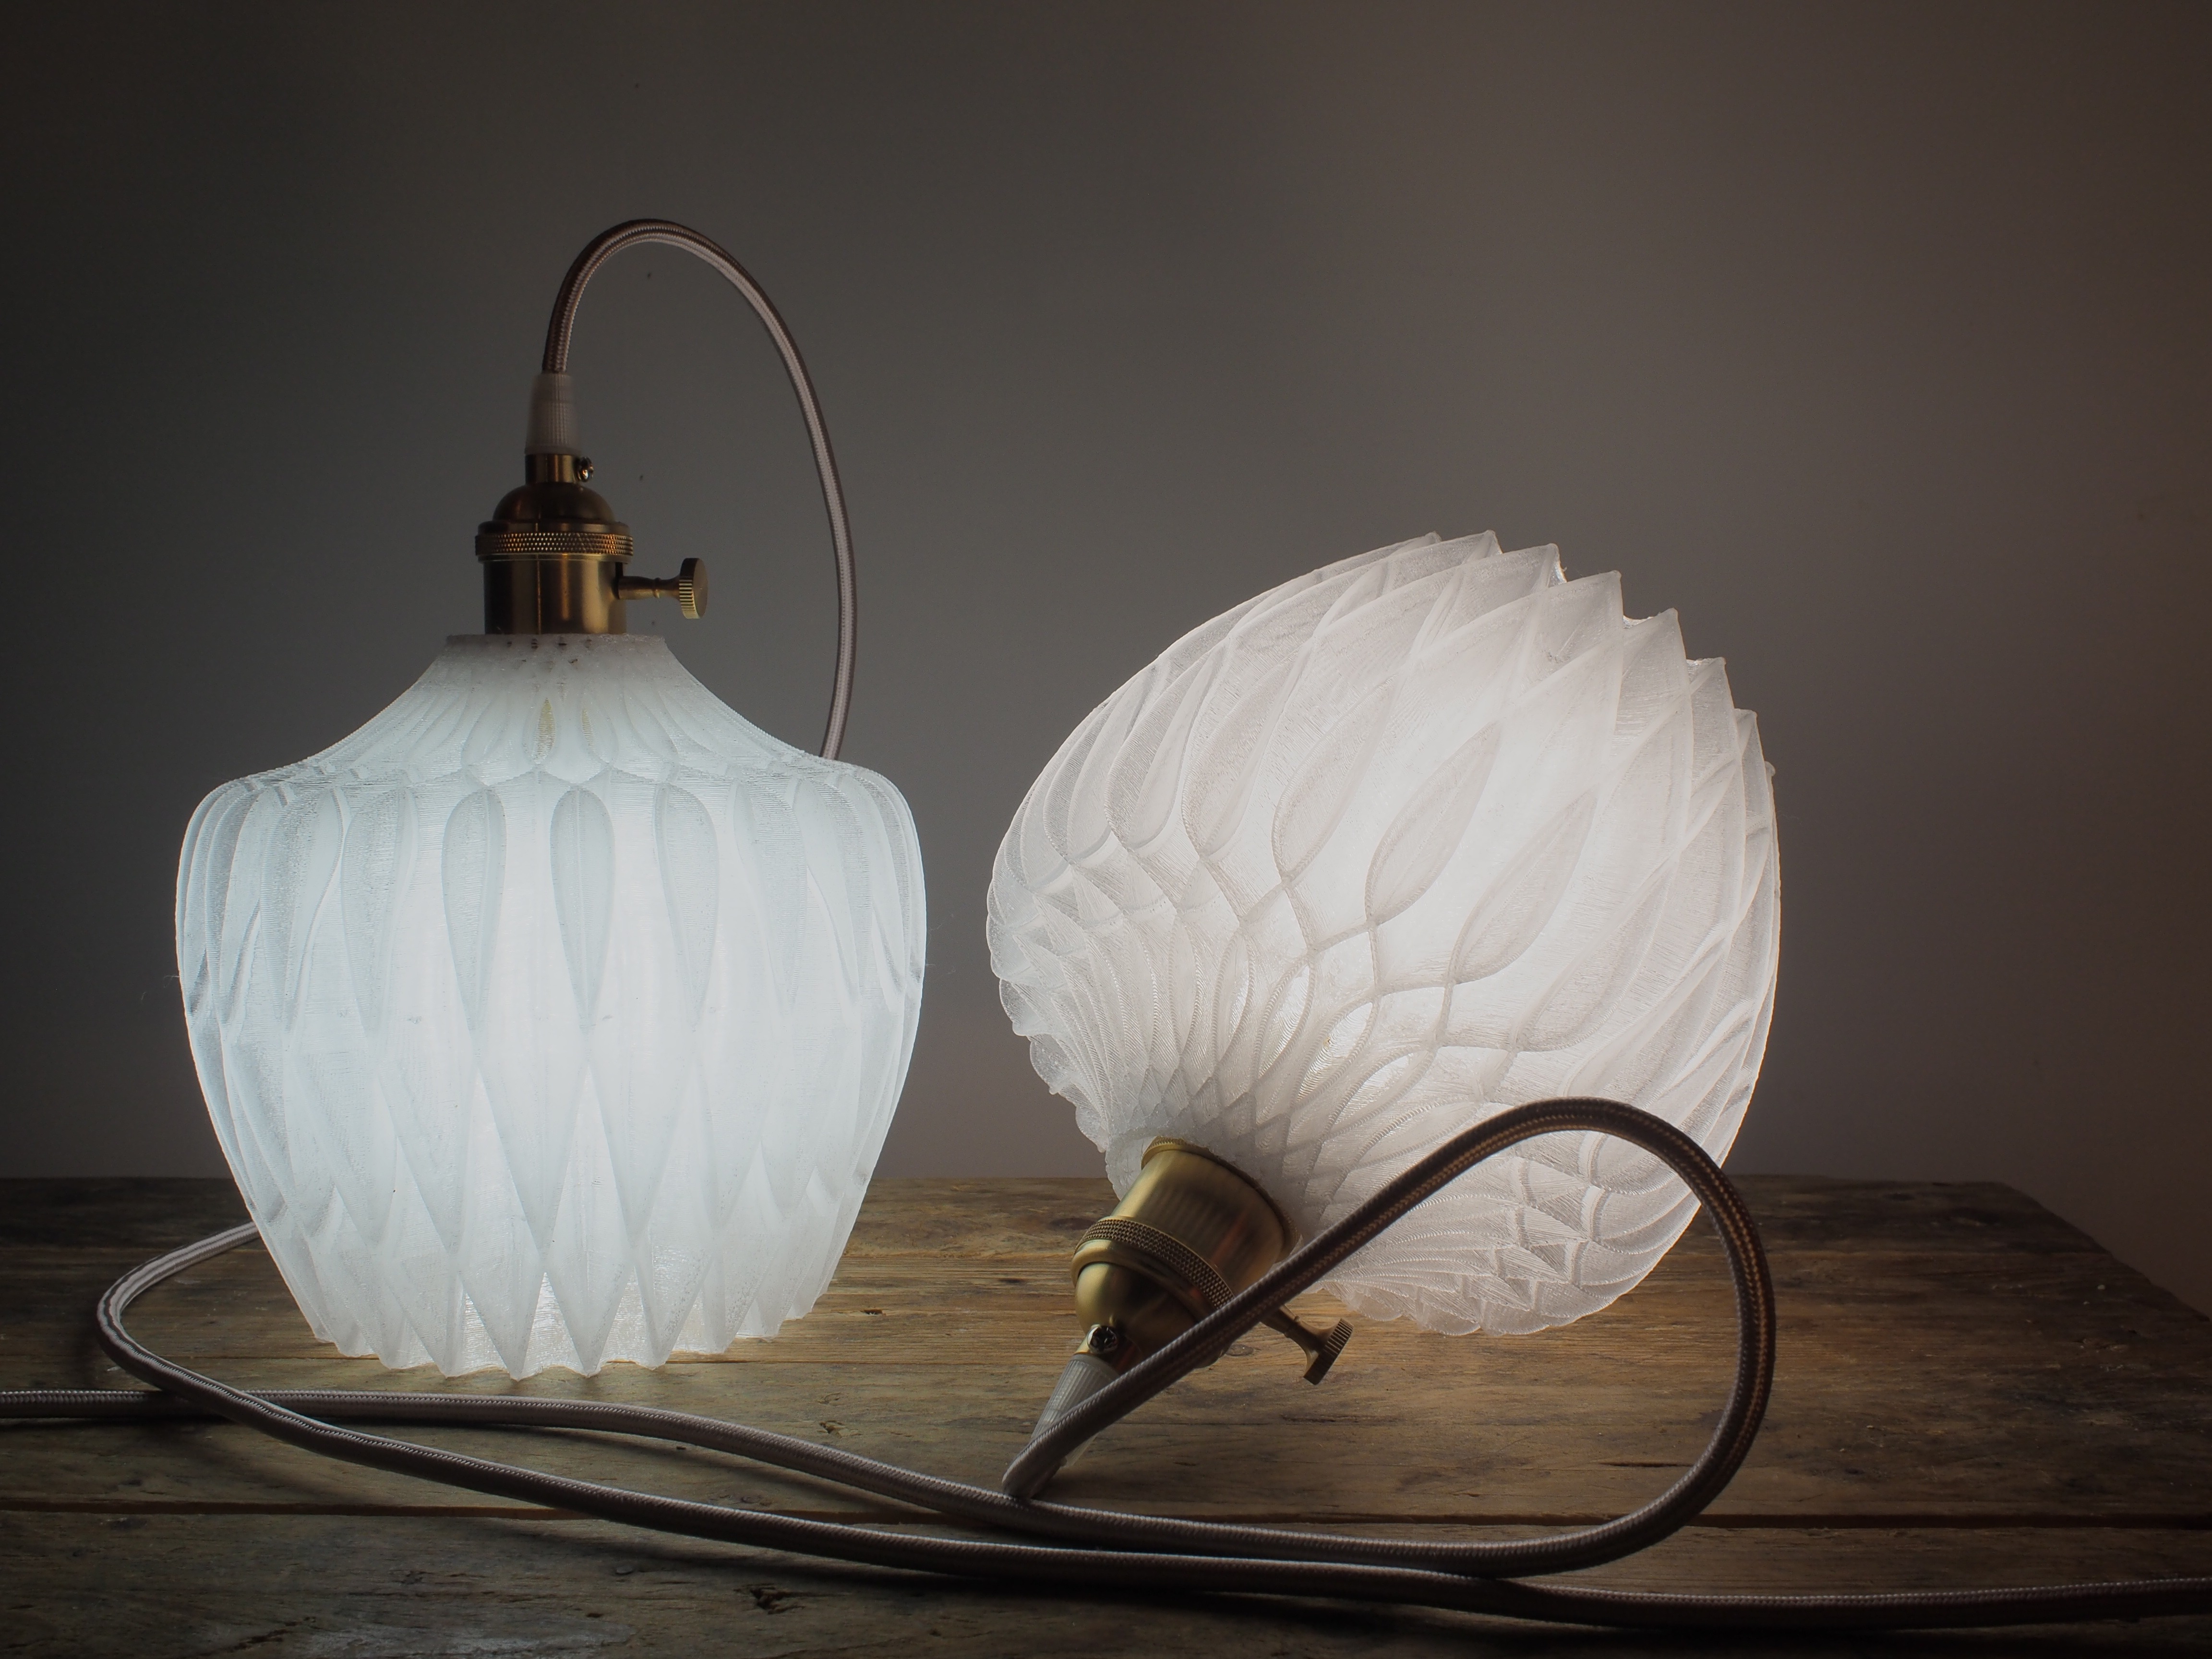 Intiem Embryo schroot Lamp Shades - Learn ColorFabb